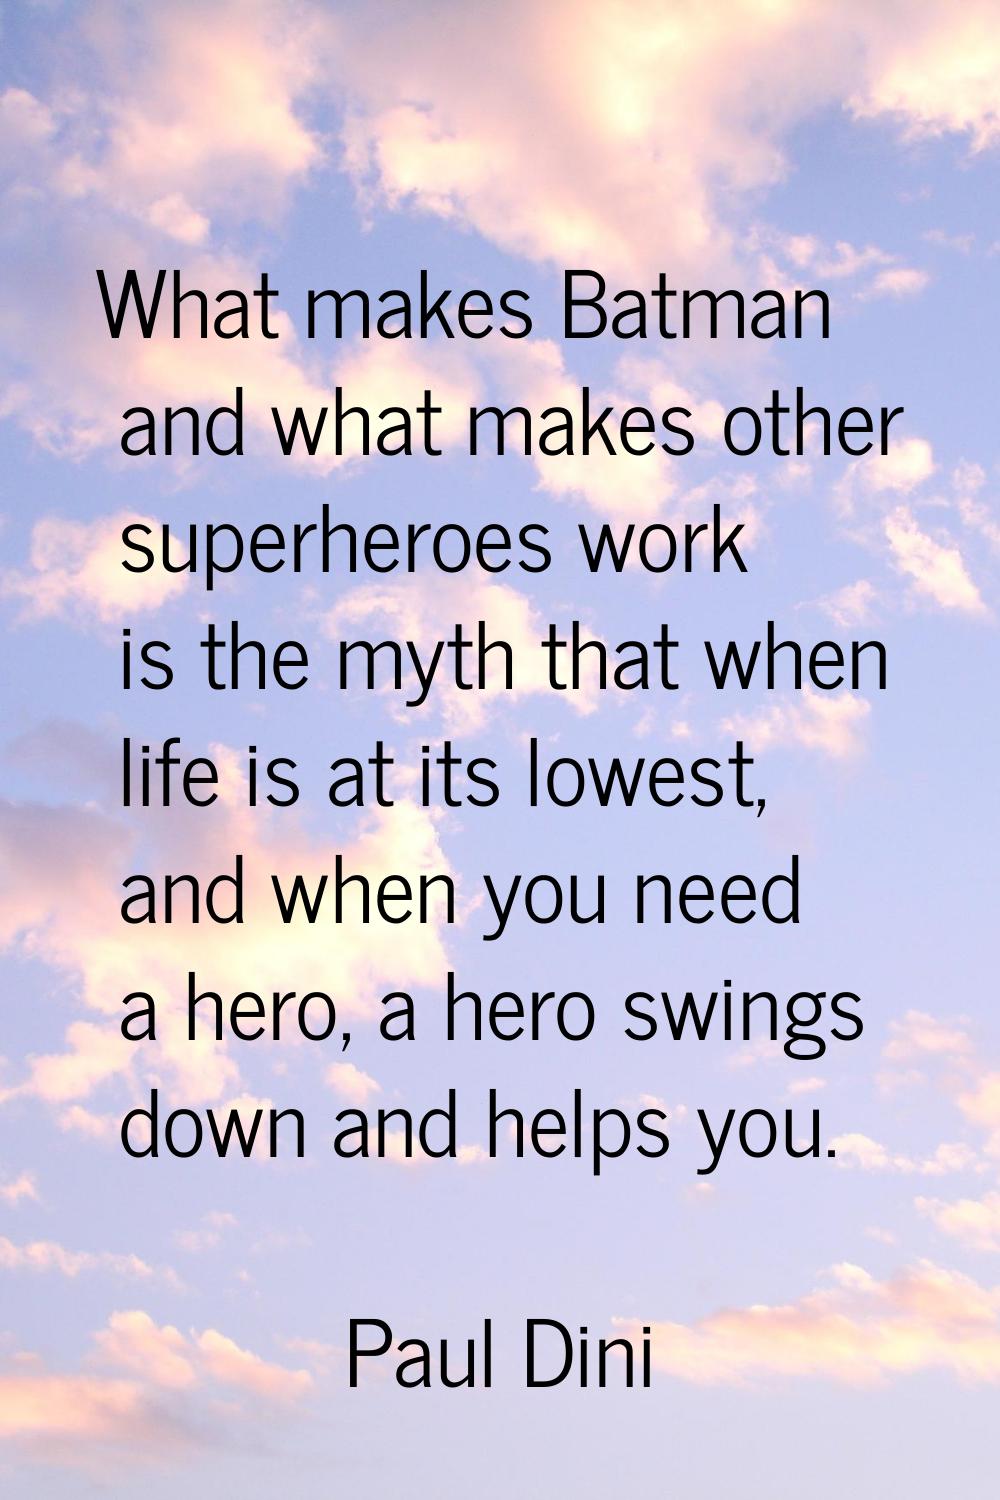 What makes Batman and what makes other superheroes work is the myth that when life is at its lowest